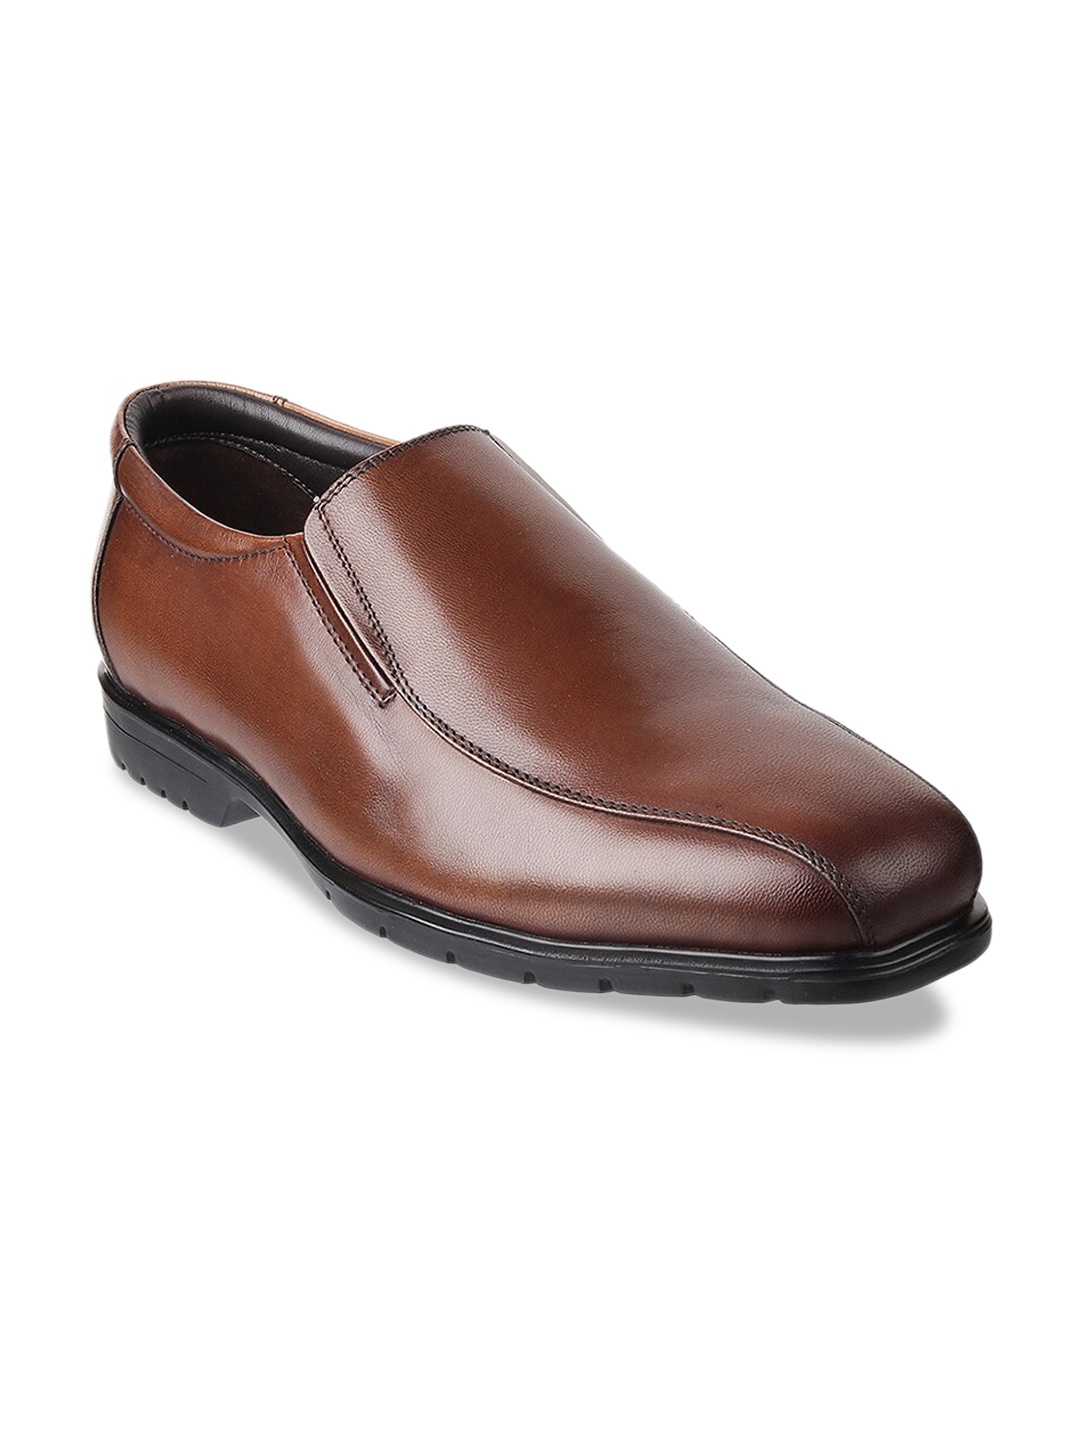 

J.FONTINI Men Tan Brown Solid Leather Slip on Shoes